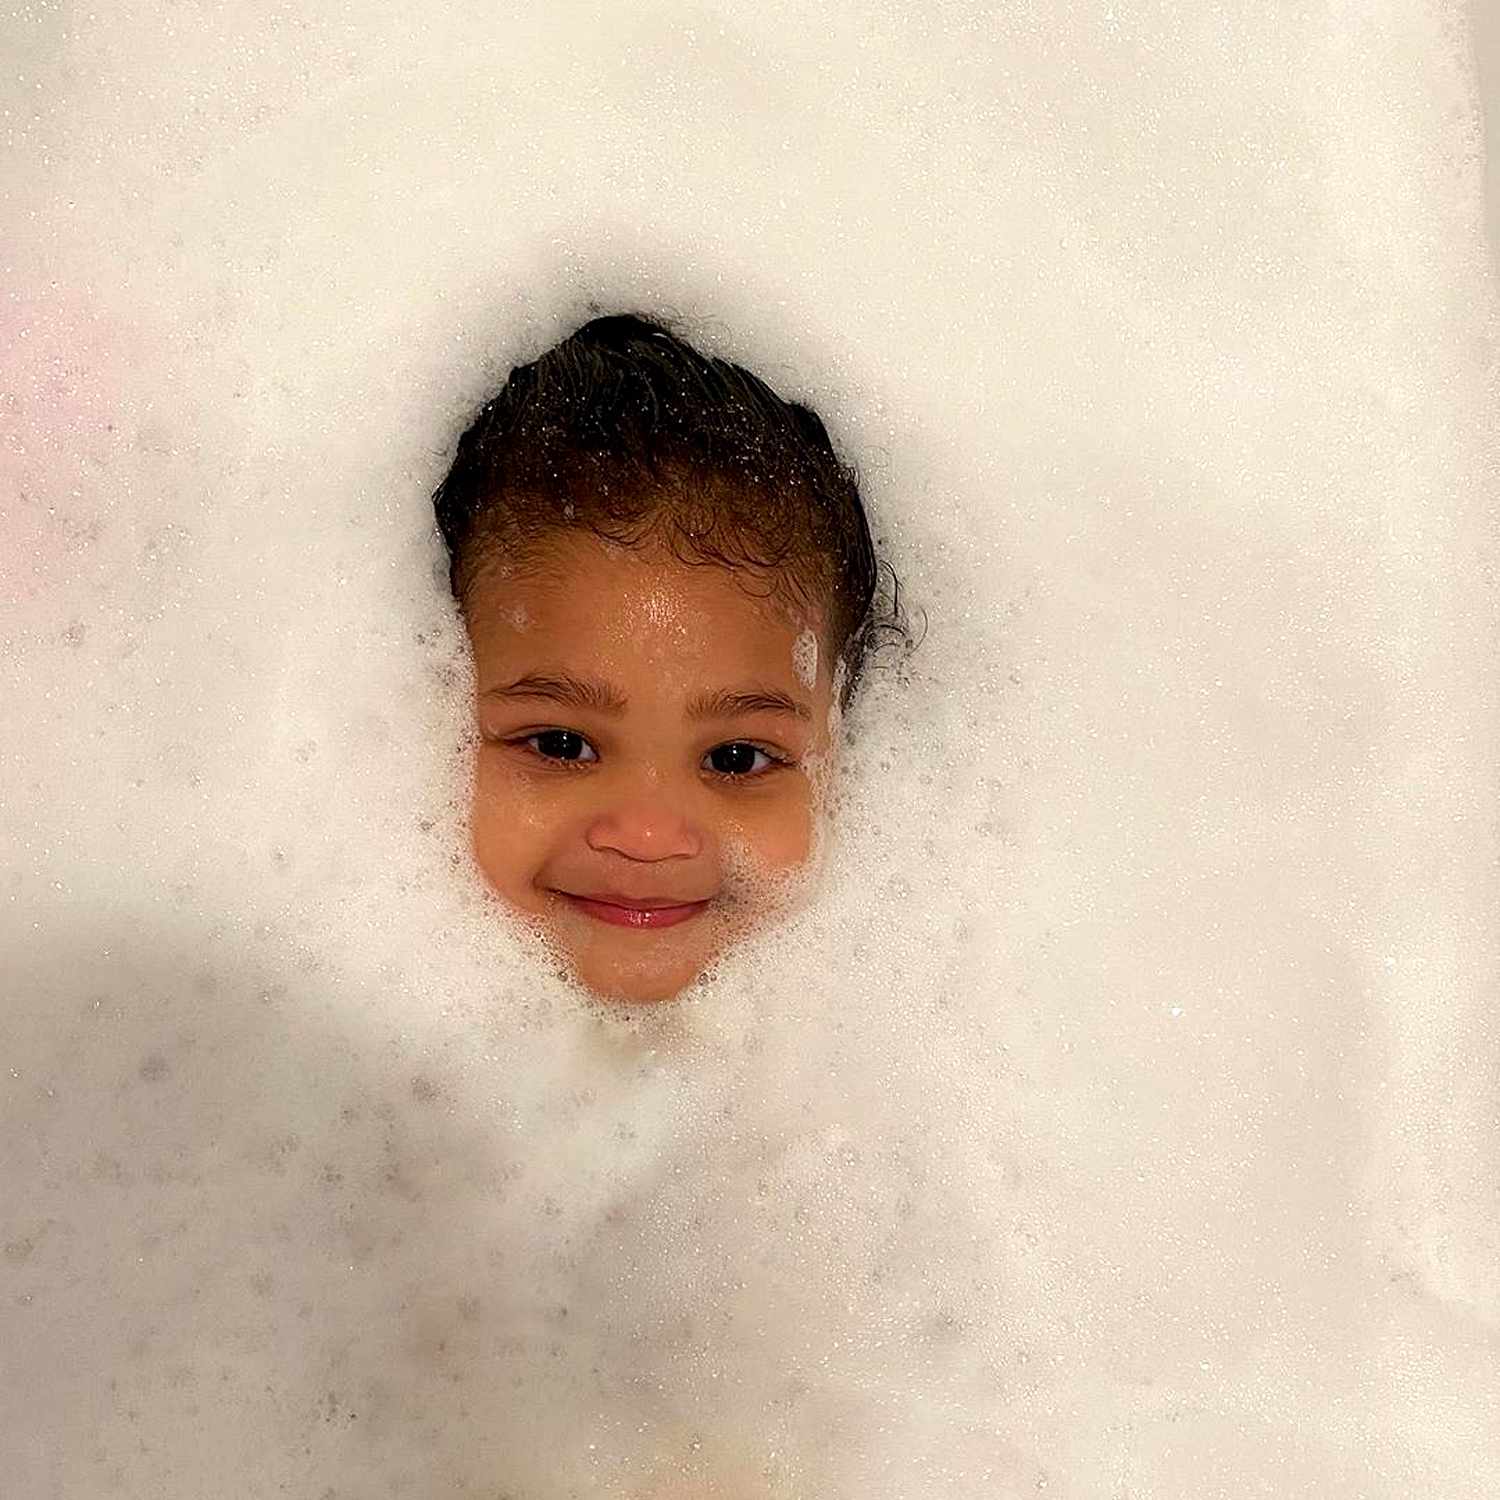 Kylie Jenner Shares Adorable Bubble Bath Photo of Daughter Stormi |  PEOPLE.com